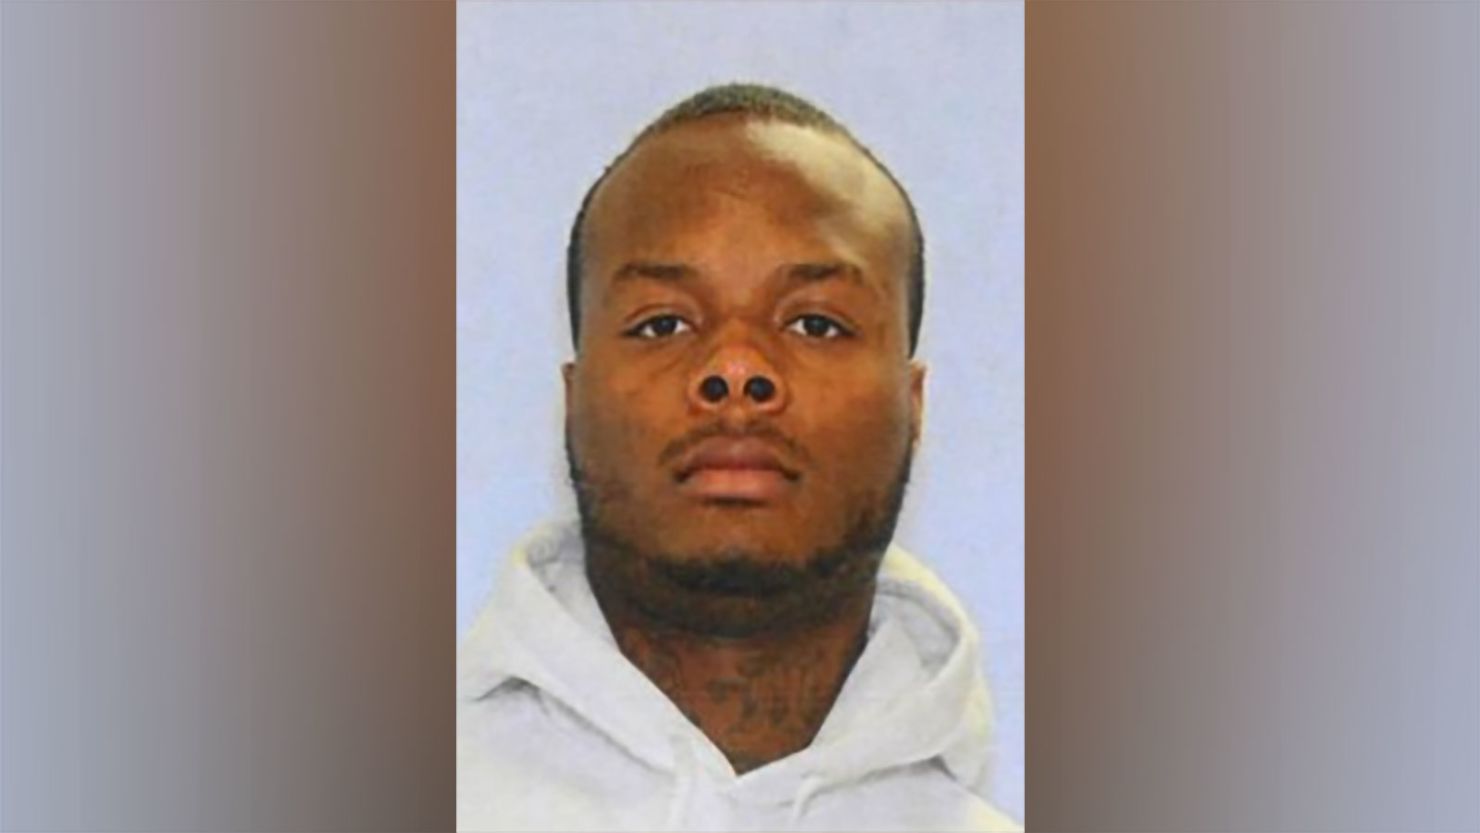 Deshawn Anthony Vaughn was a suspect in the death of an Ohio police officer.